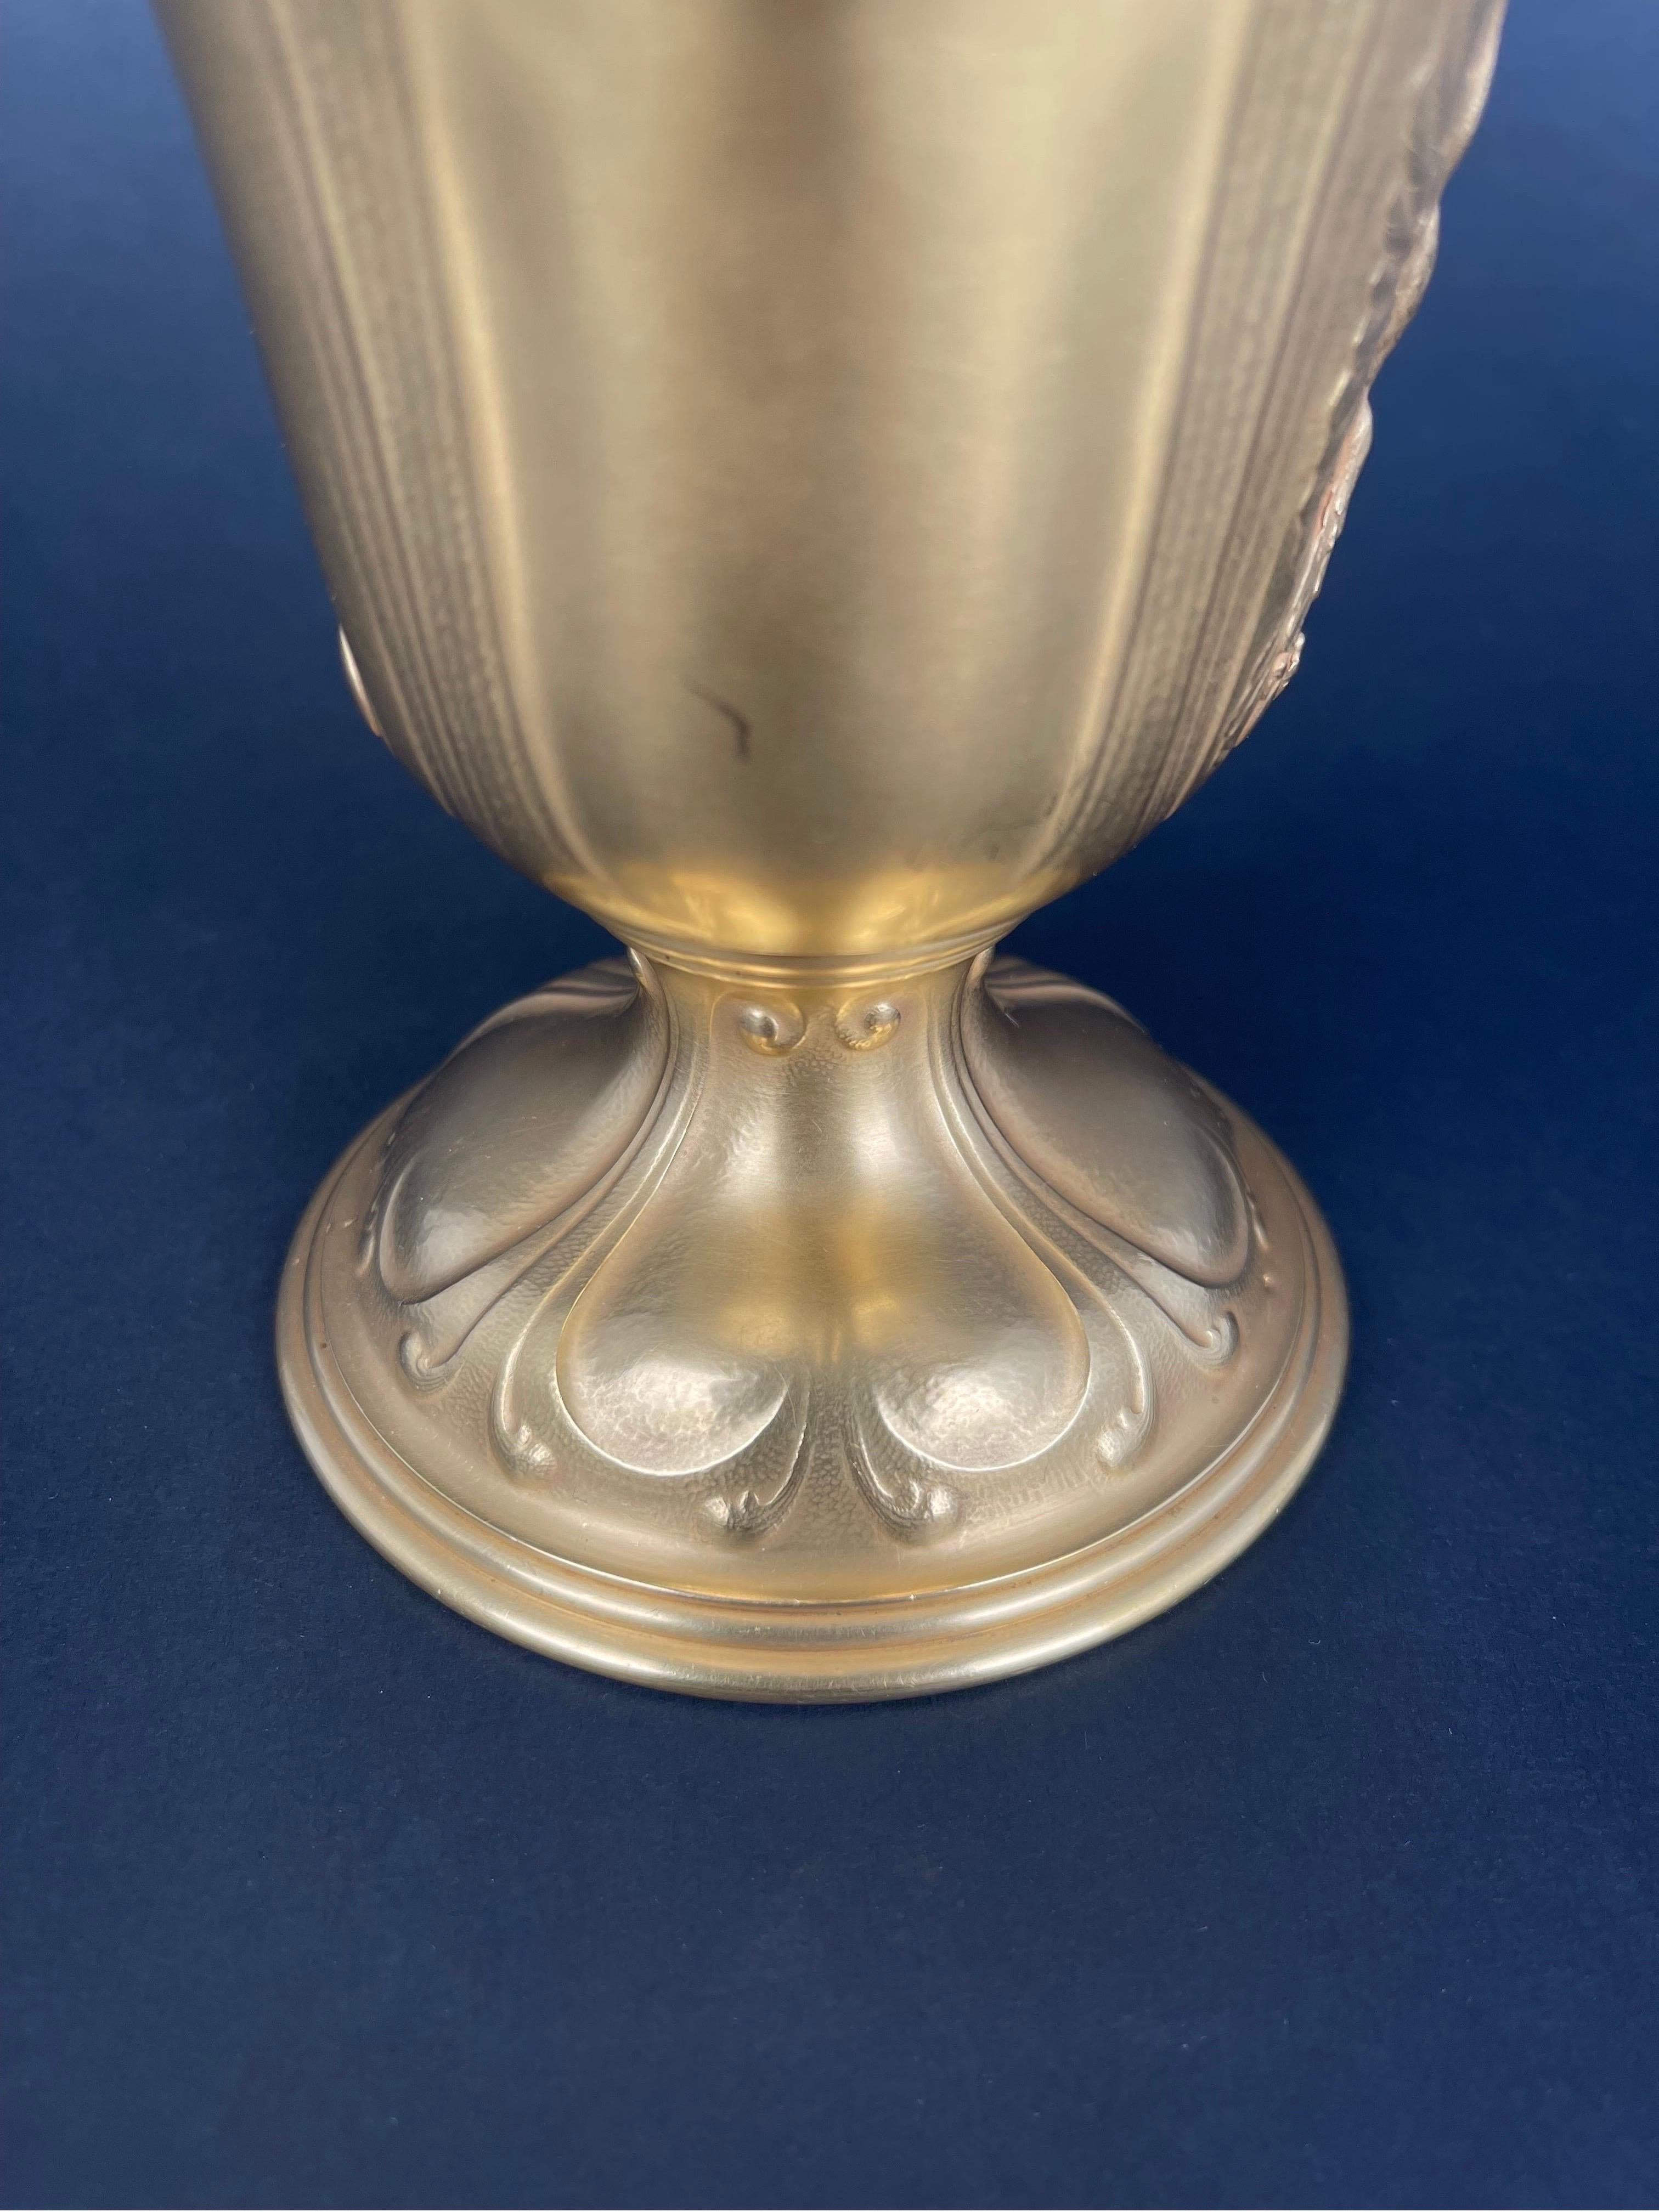 An Art Nouveau 18k Yellow Gold Trophy By Tiffany & Co. For Sale 3